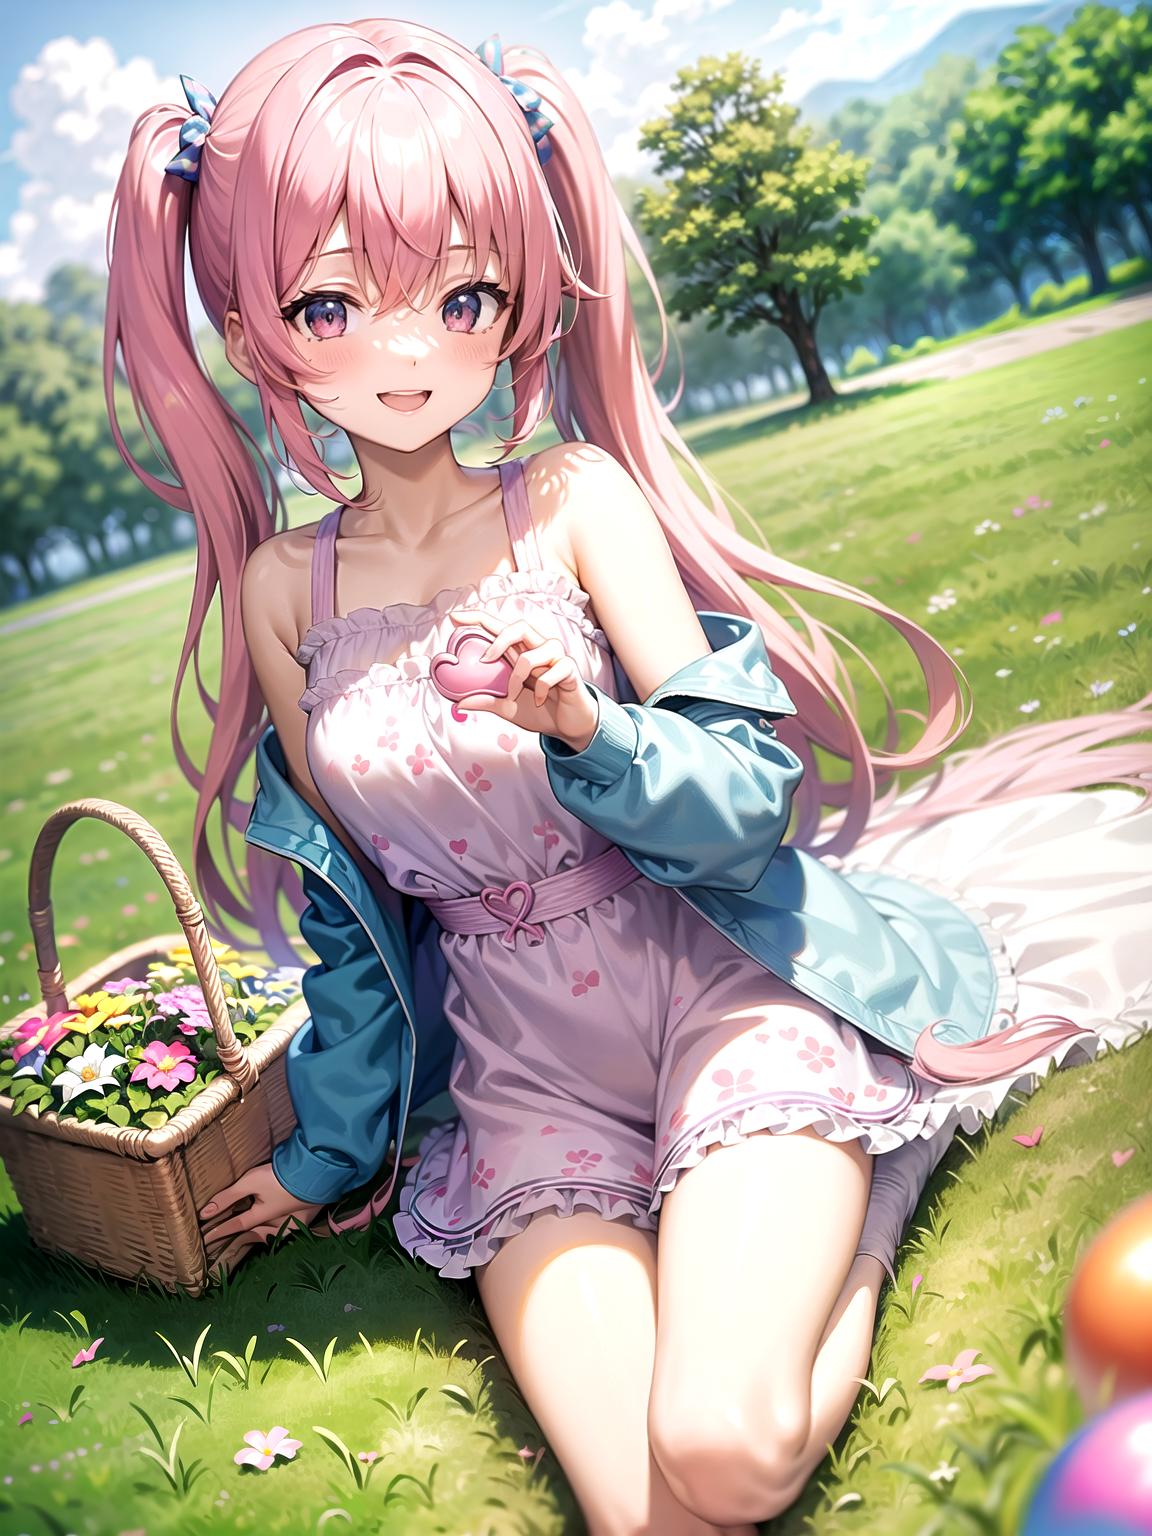  master piece, best quality, ultra detailed, highres, 4k.8k, Pink haired girl with twin tails and a blue jacket, Smiling and holding a heart shaped balloon, Exudes a cheerful and lively expression, BREAK A dreamy girl's day out, A vibrant, pastel colored park, Heart shaped balloons, a flower filled picnic basket, and a fluffy pink blanket, BREAK Radiates a whimsical and carefree vibe, Soft, warm lighting and a gentle breeze blowing through the park,